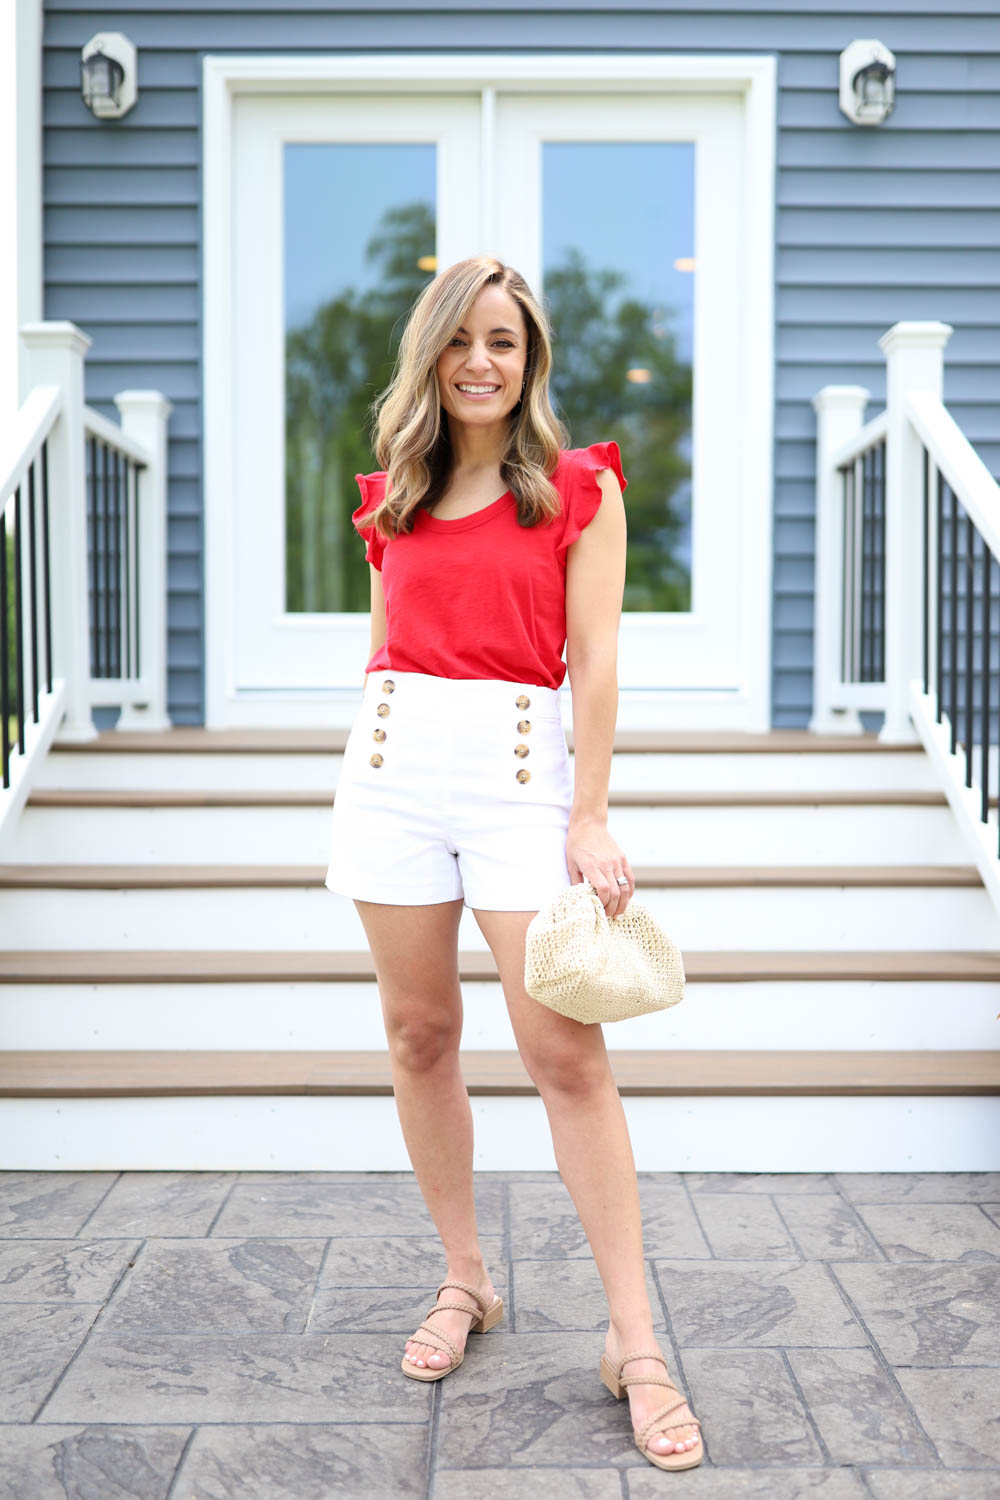 Red, White & Blue Outfits for Summer - Pumps & Push Ups